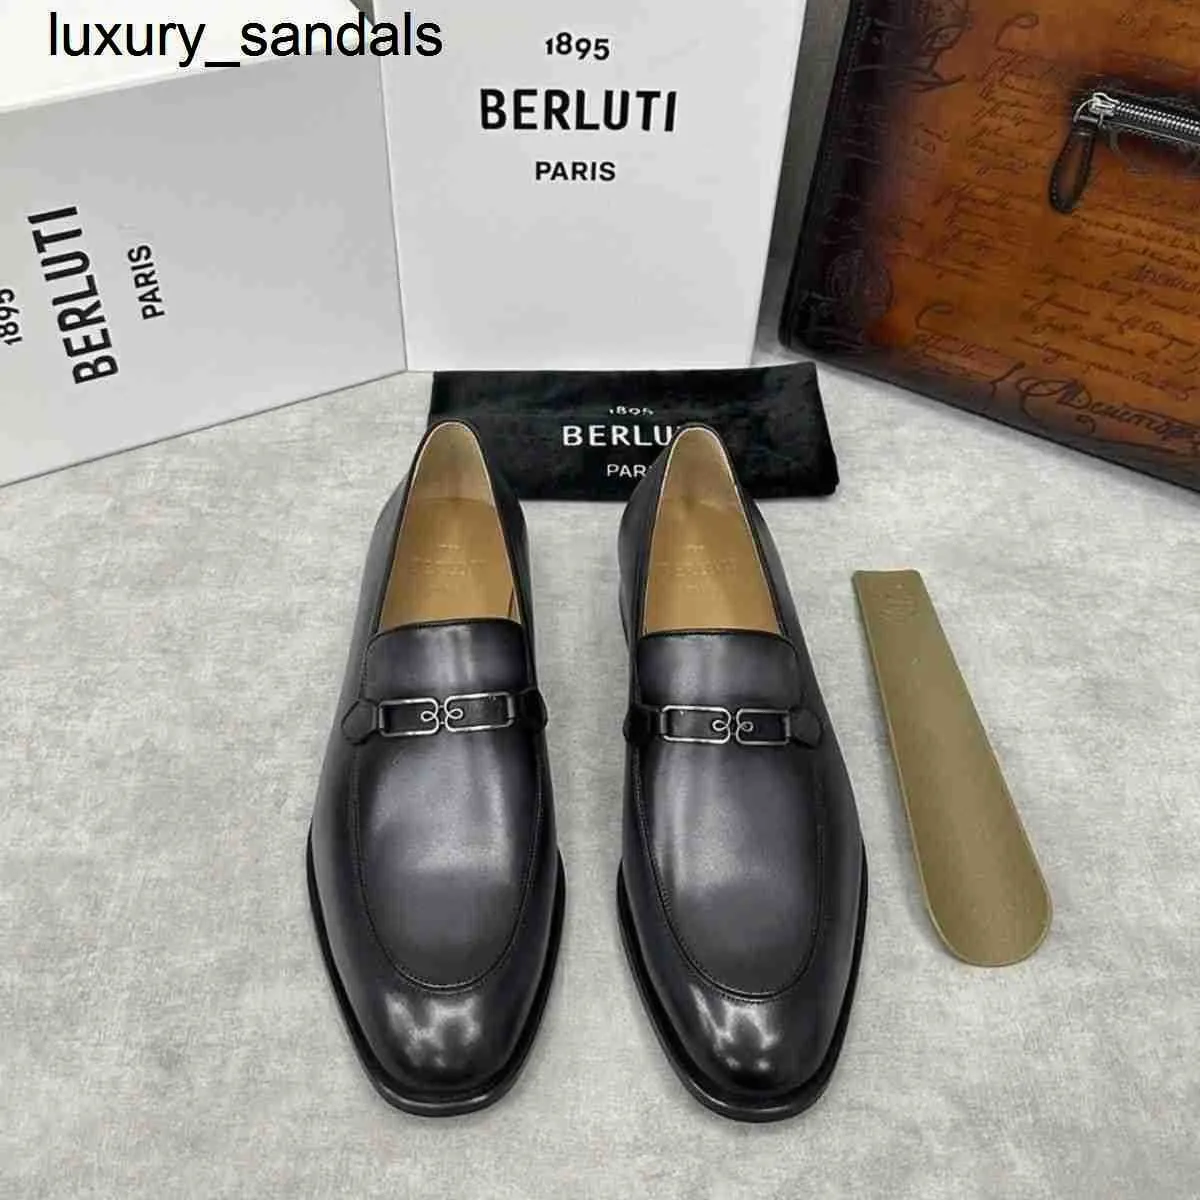 Berluti Business Leather Shoes Oxford Calfskin Handmade Top Awendy Color Posted Step One Lefu with Metal Buckle Gentlemen's CasualWQ